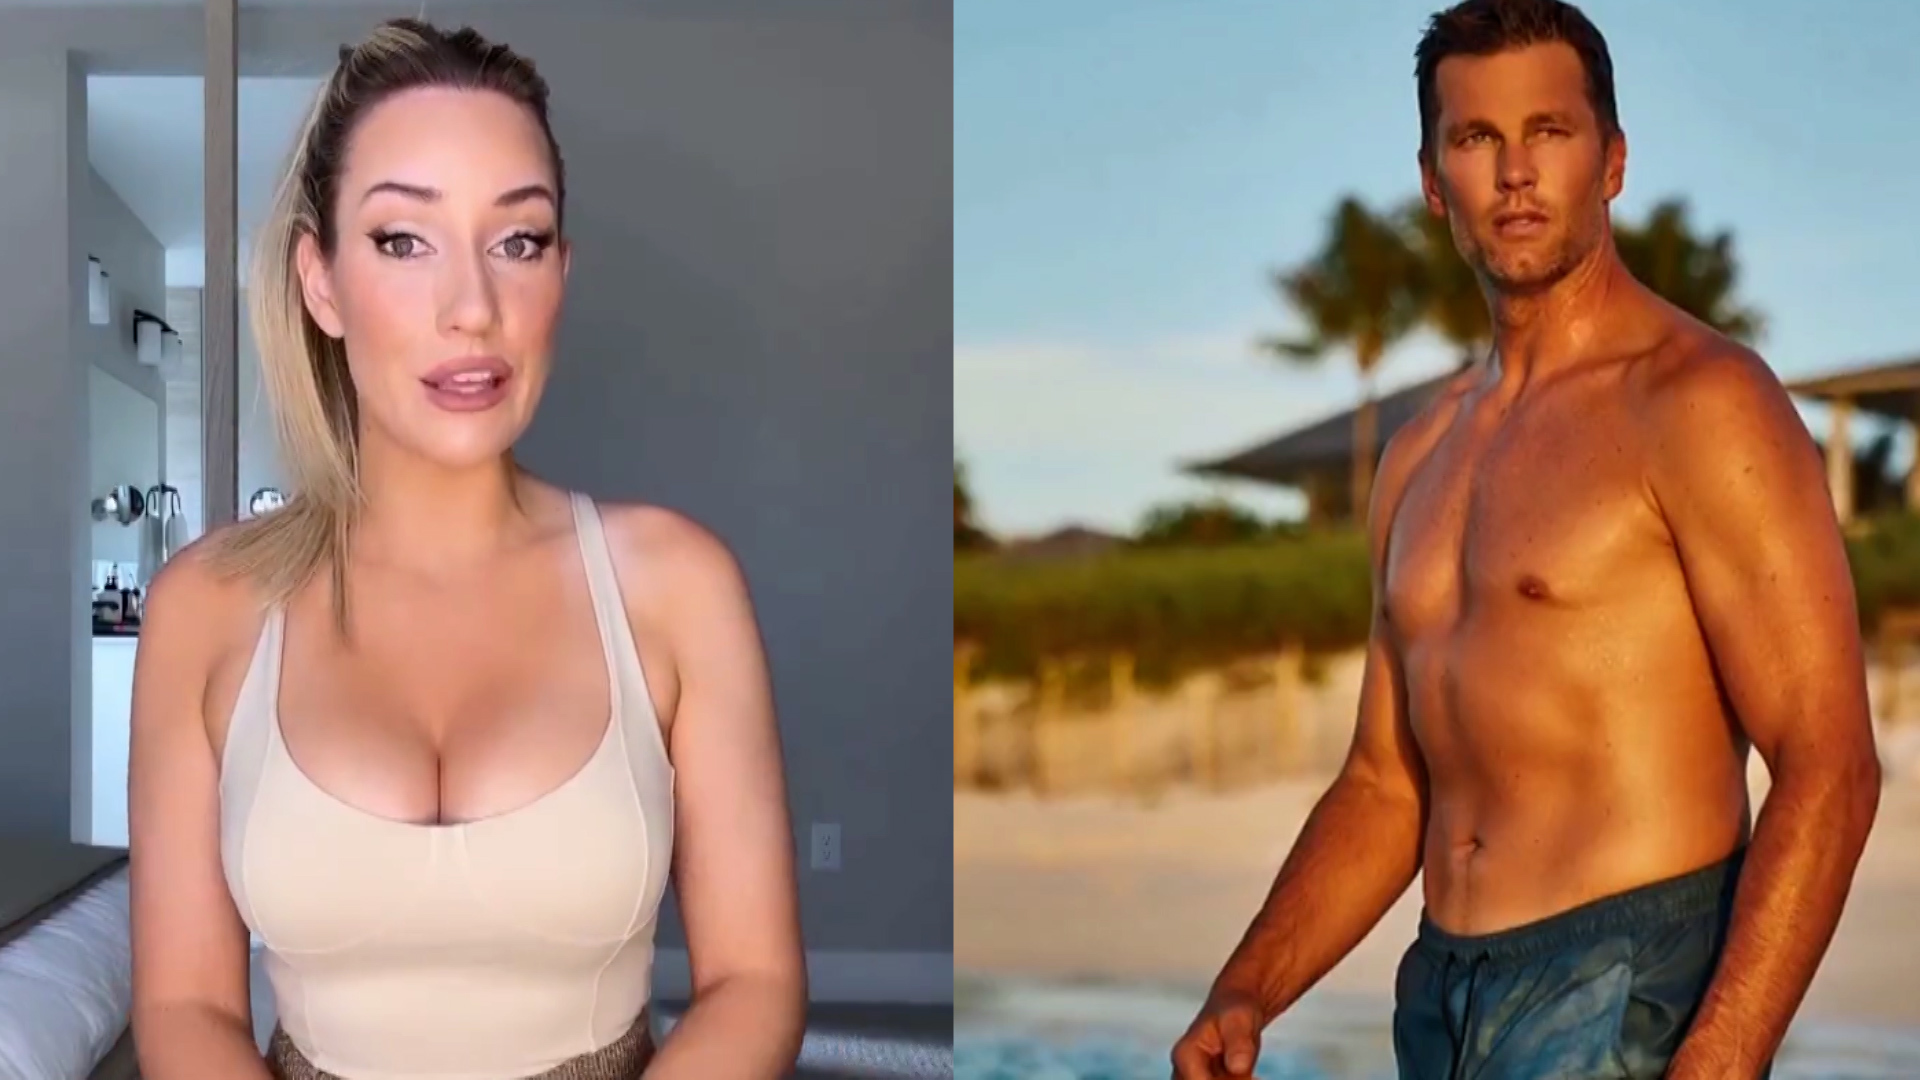 Paige Spiranac calls out Tom Brady and Cristiano Ronaldo for 'over-sexualizing' themselves